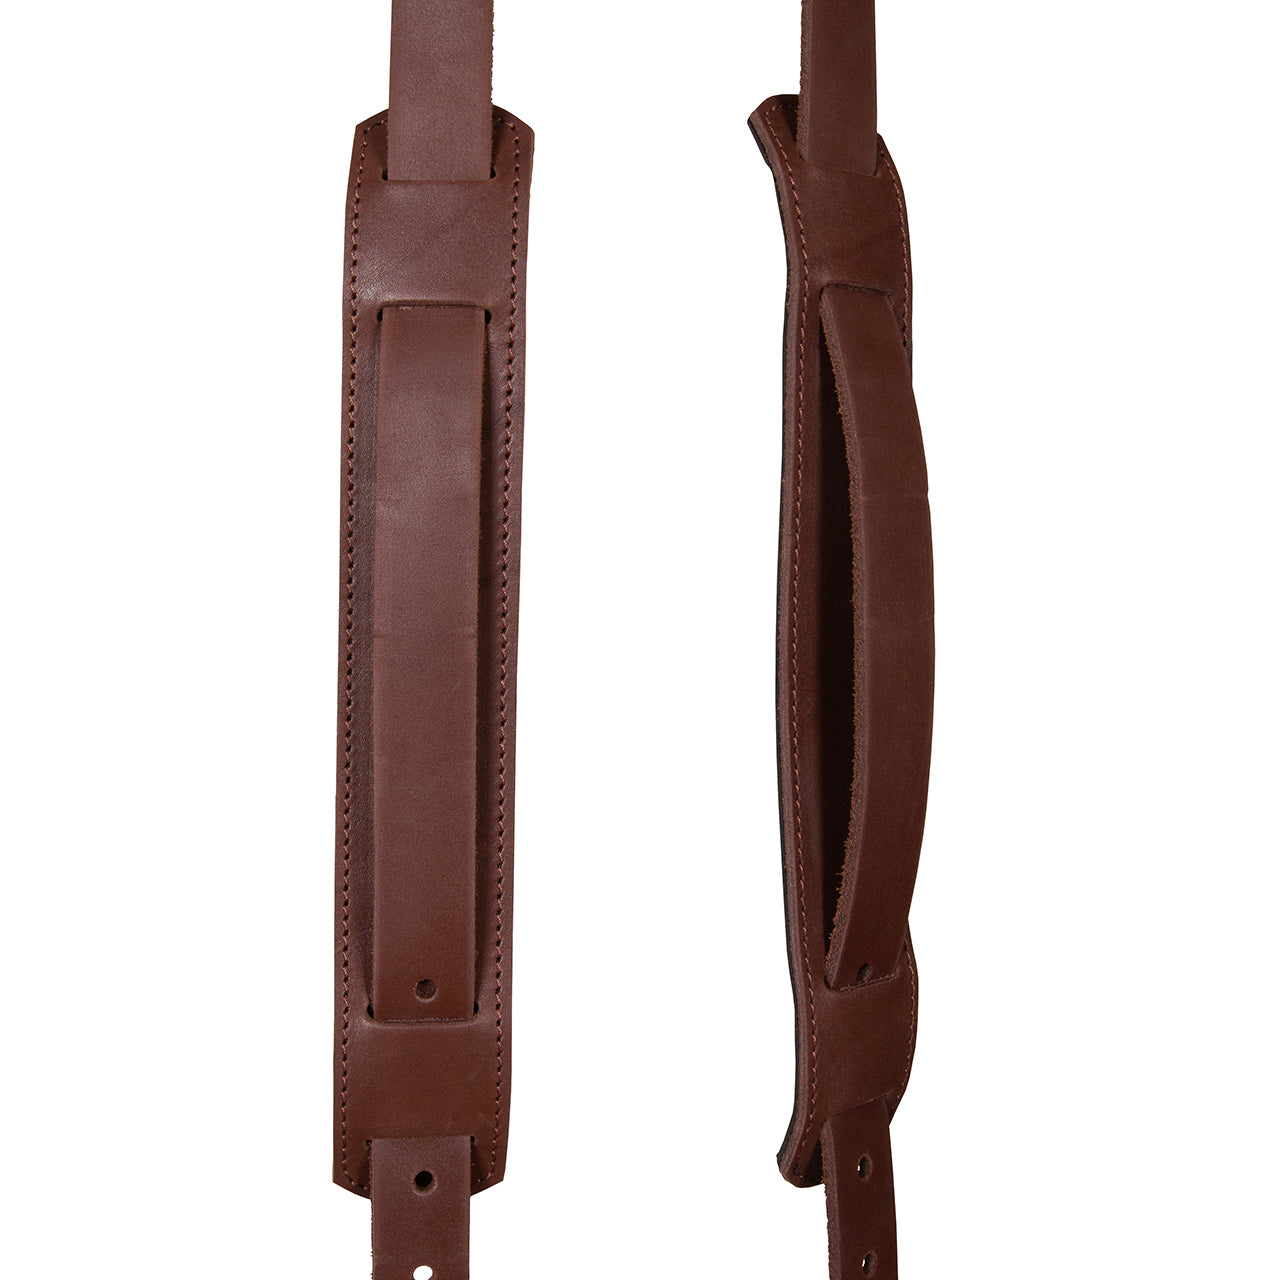 Hold Tight, Look Right: Leather Suspenders That Sizzle! by Artnamic —  Kickstarter